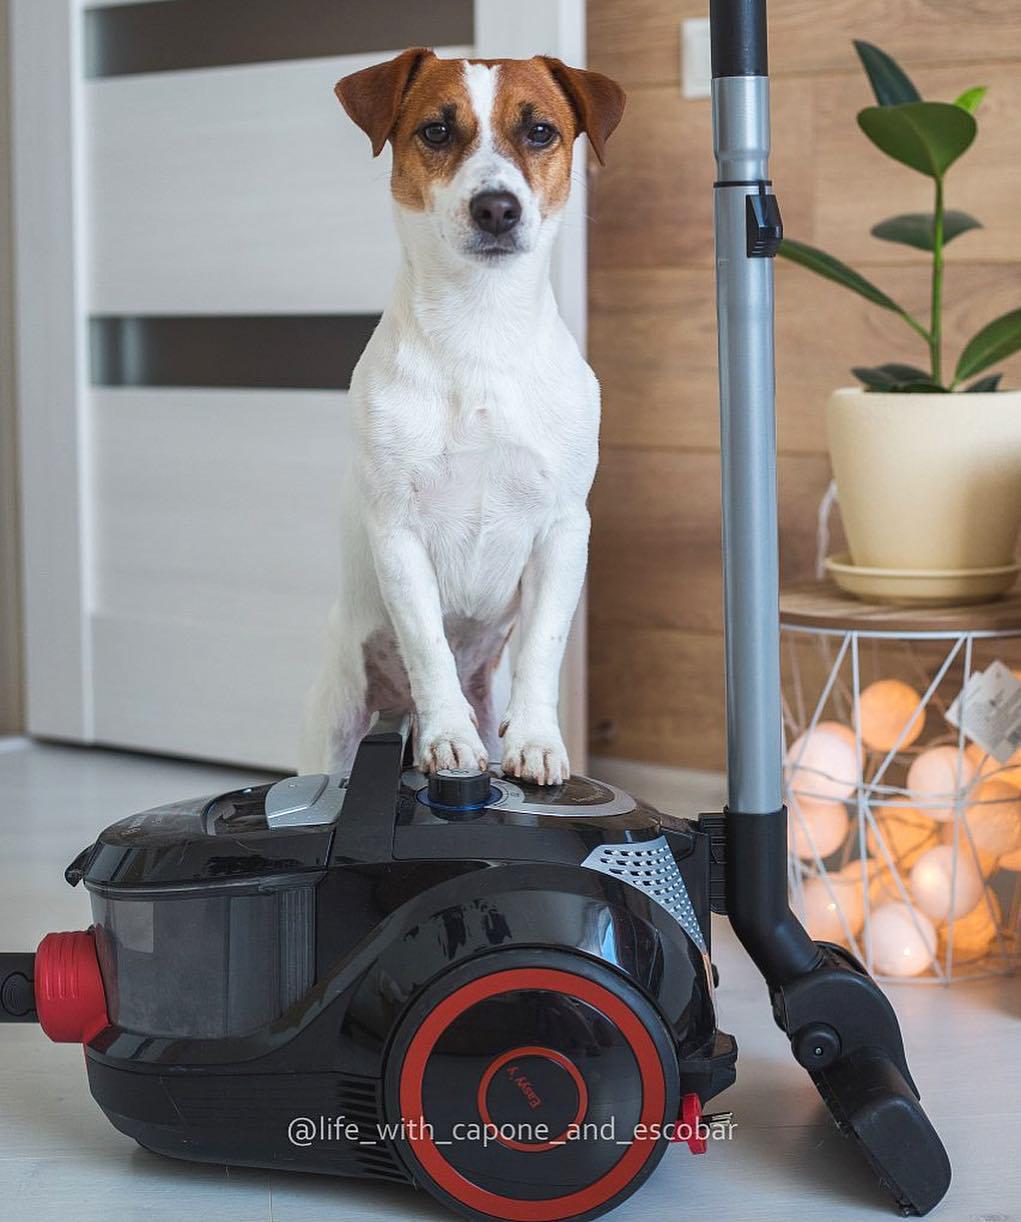 Jack Russell standing up against the vacuum